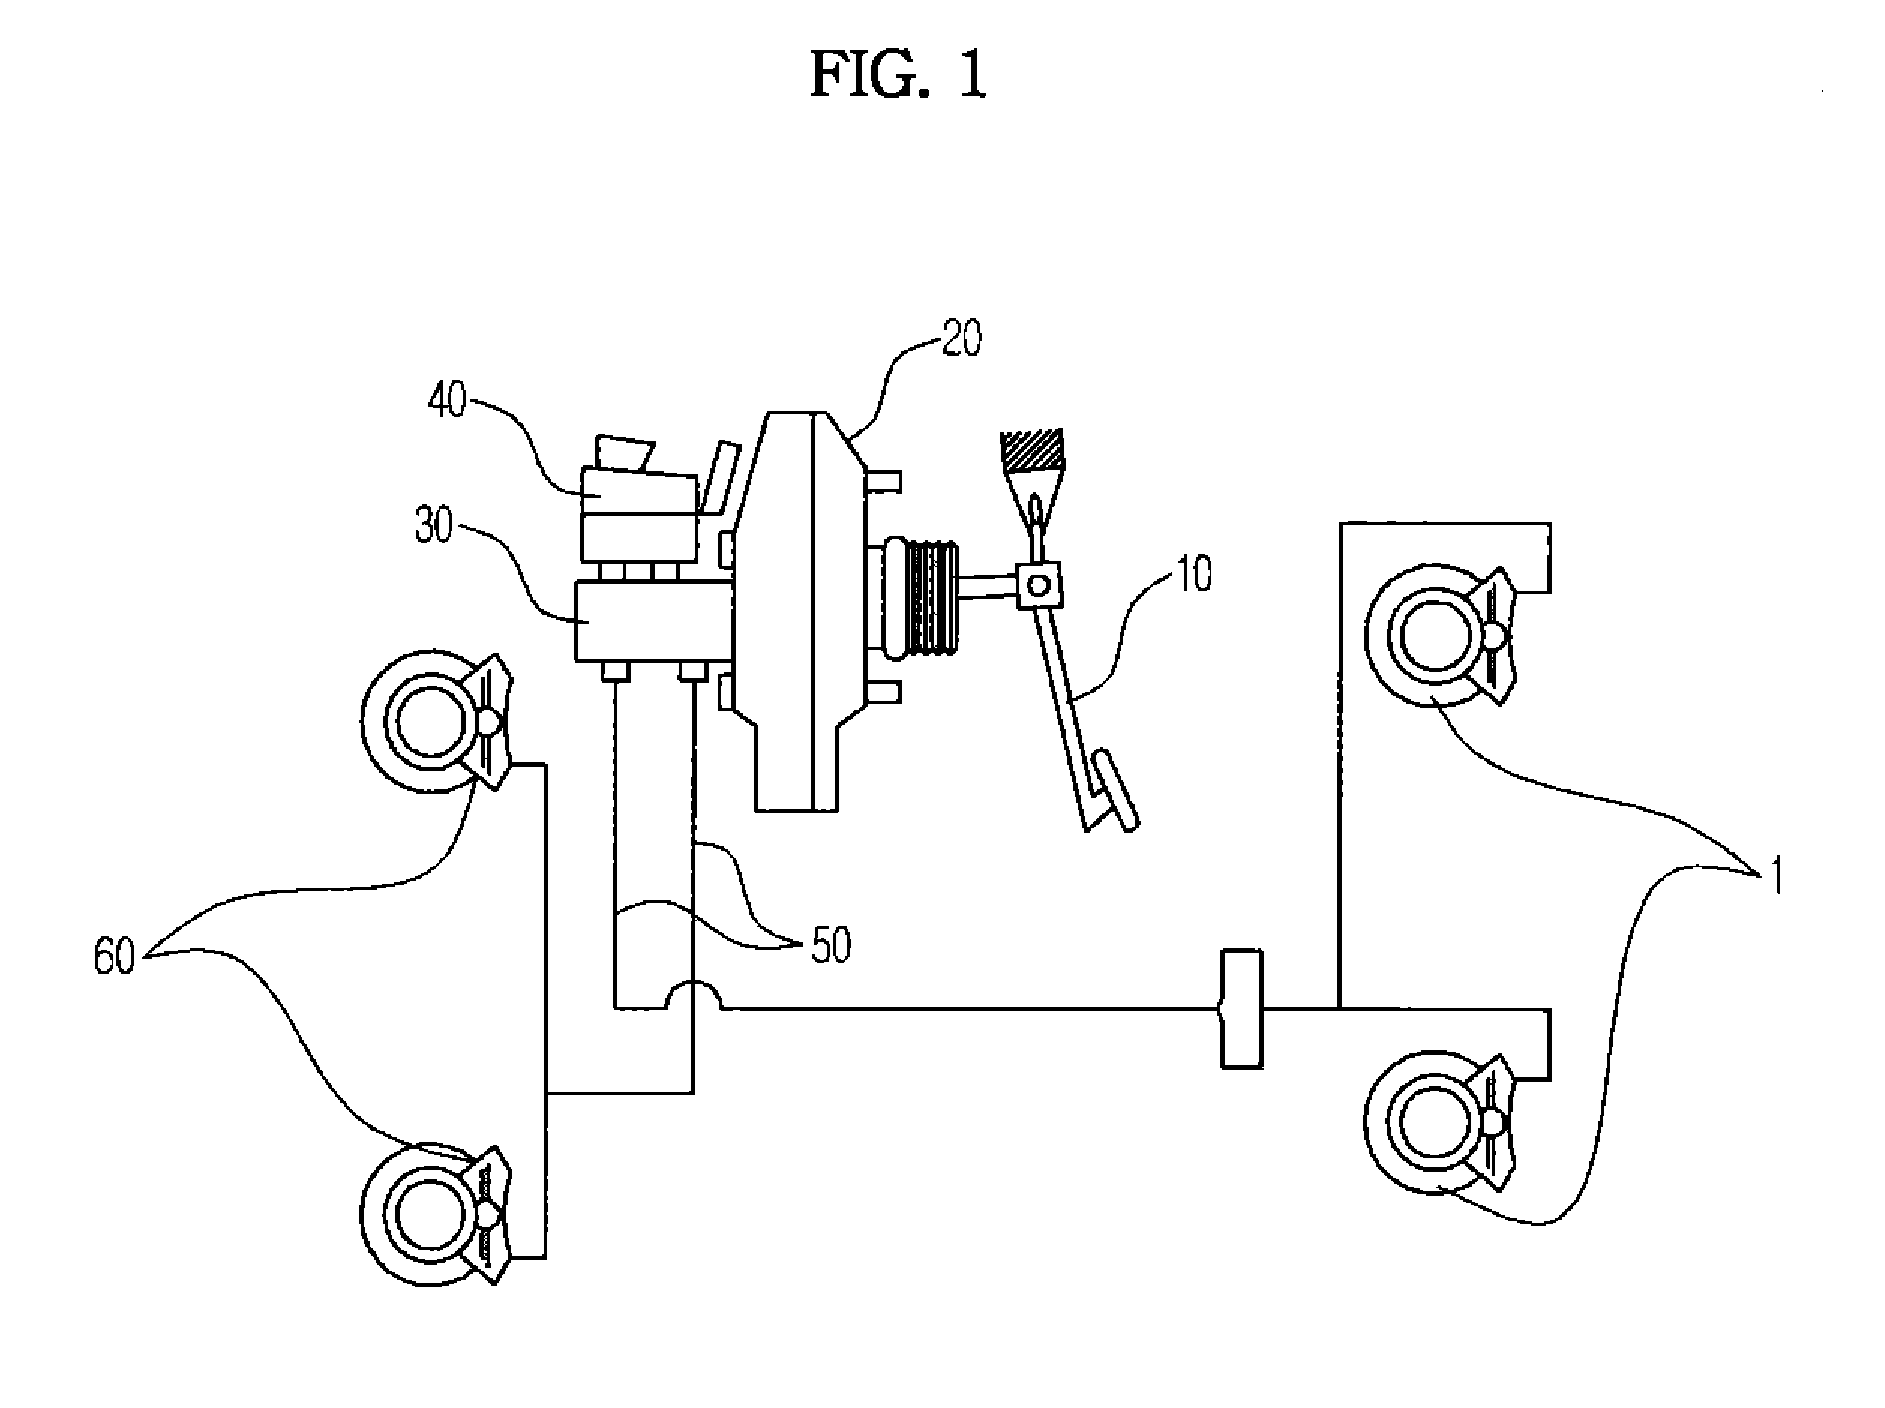 Pre-fill system to improve brake feel and method of increasing initial flux using the same